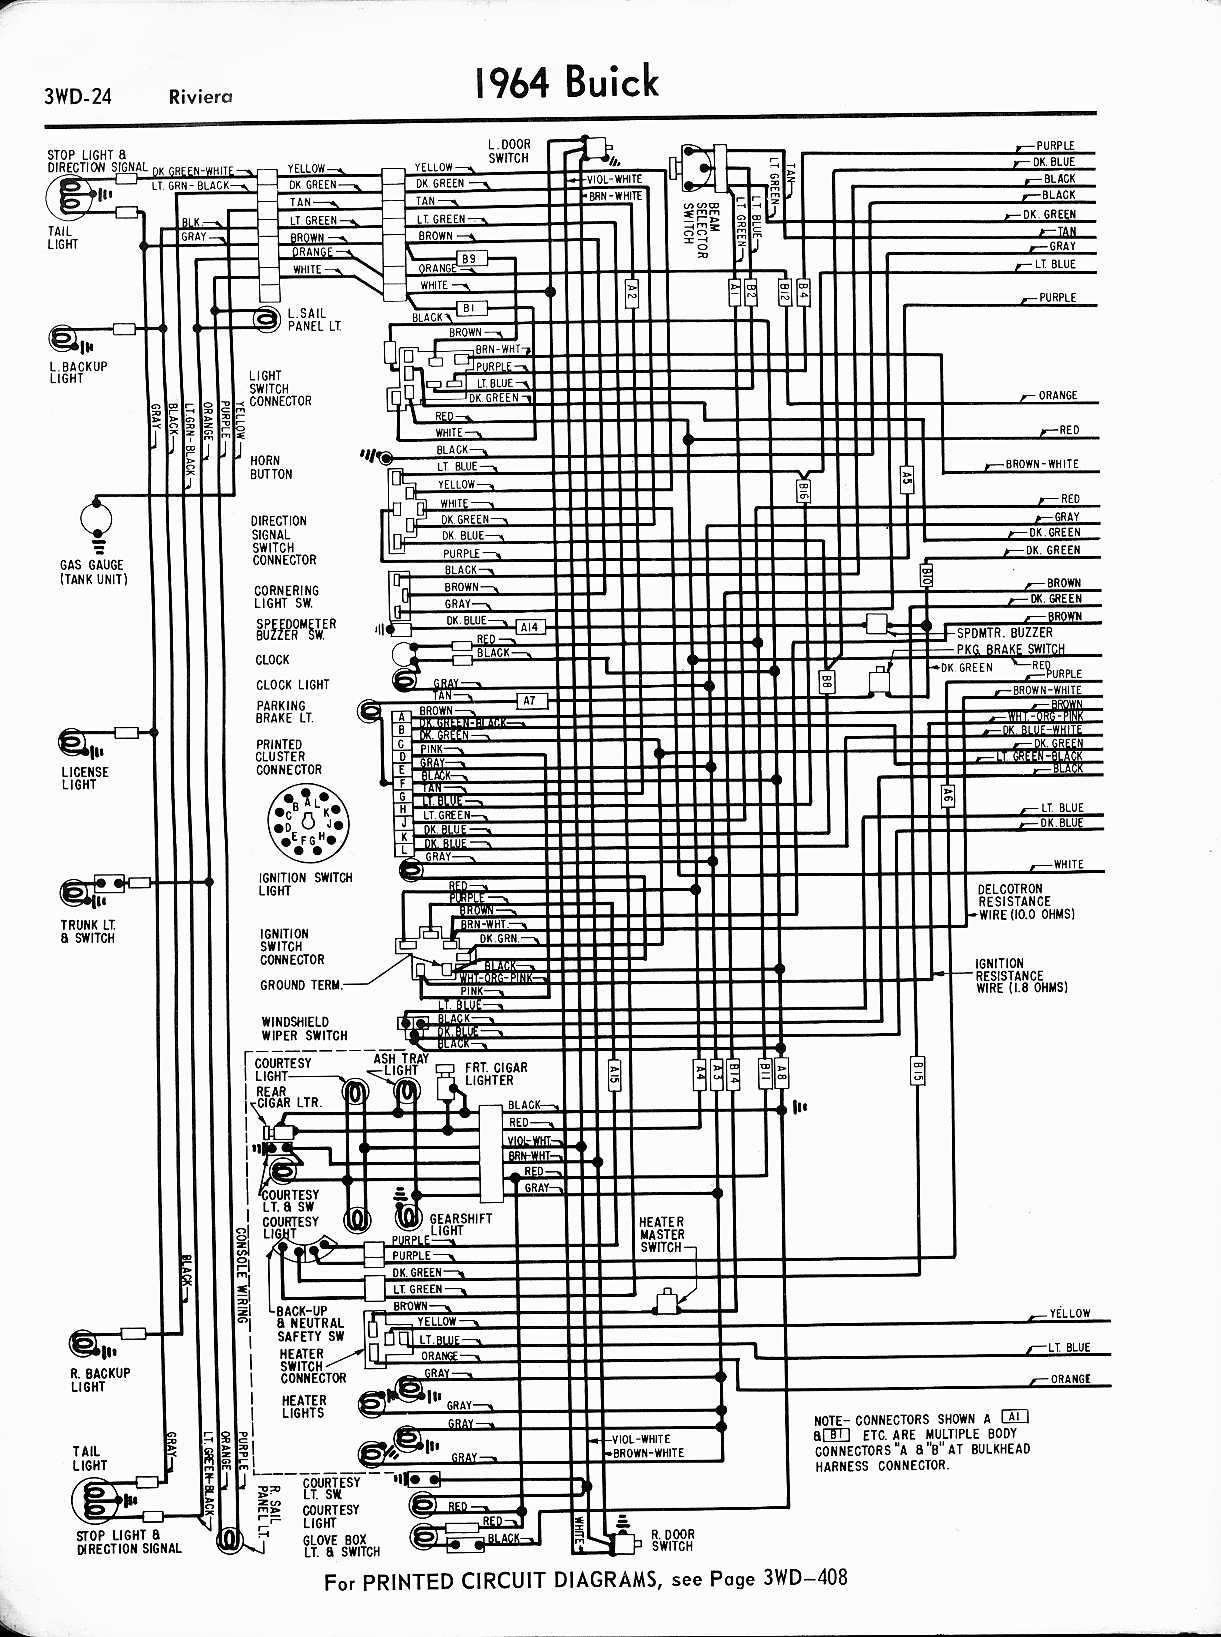 1957 Buick Wiring Diagram | Wiring Library